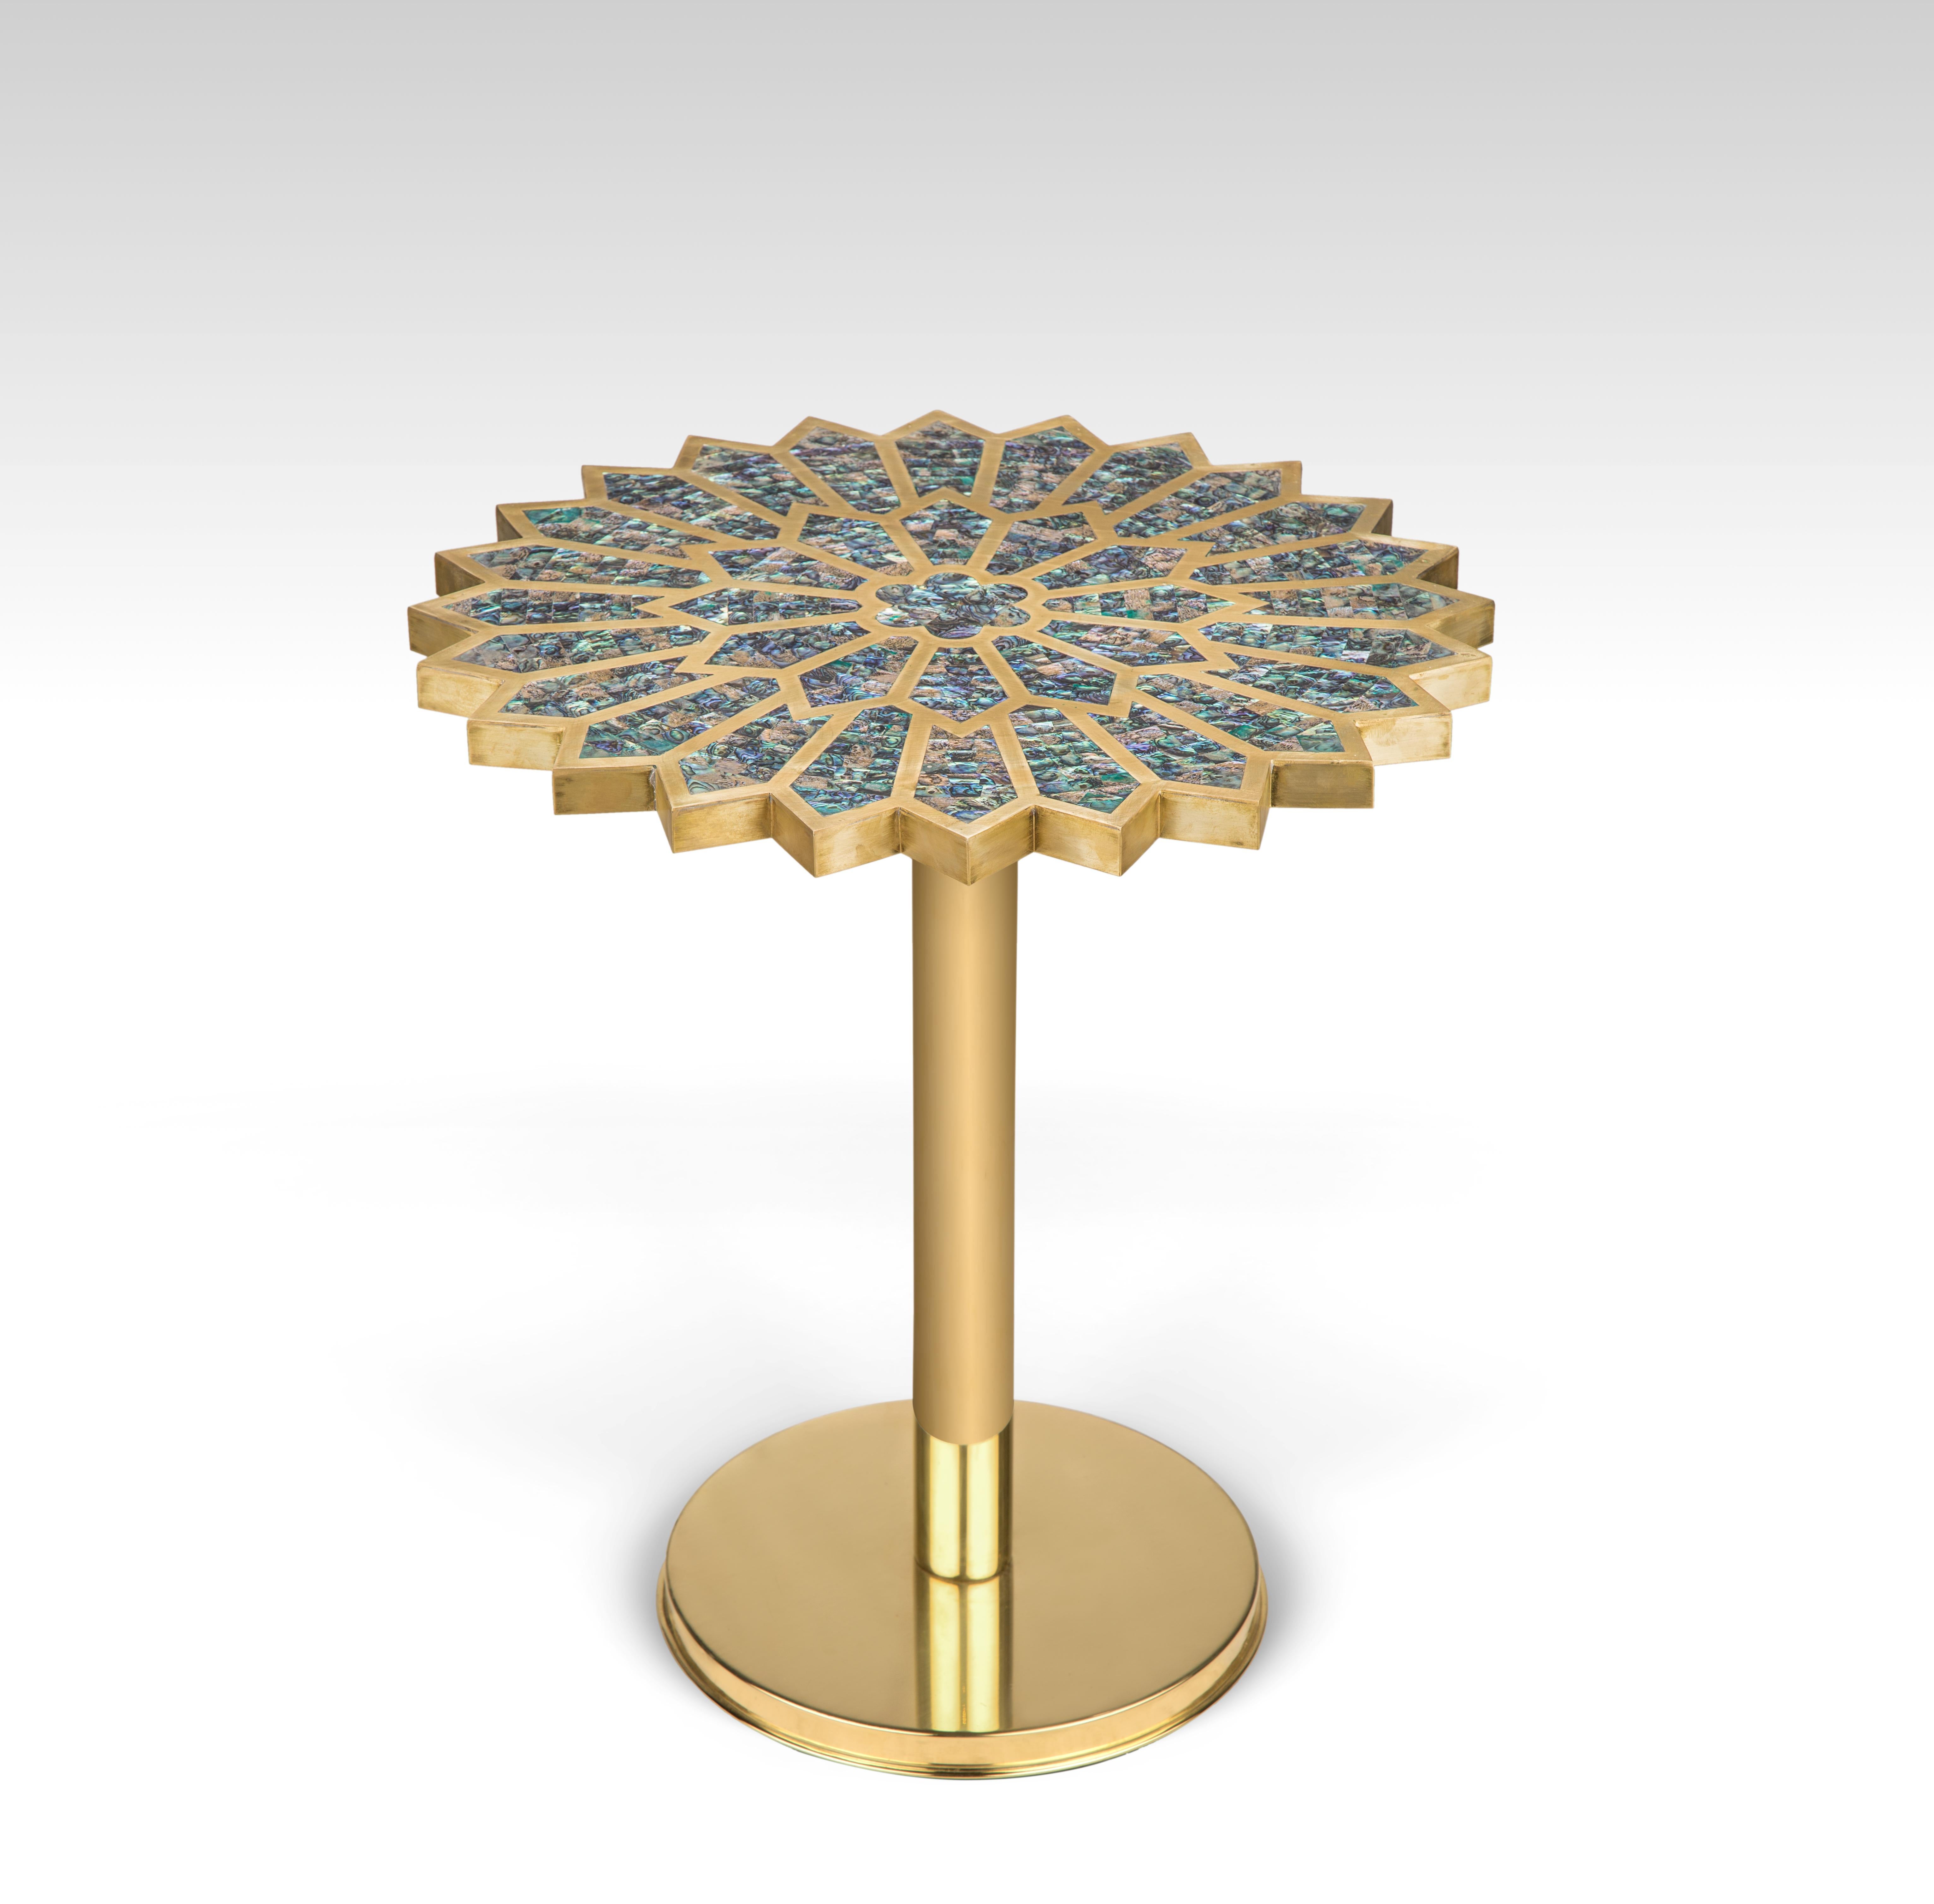 Rare Turquoise Mother-of-Pearl Side Table Handcrafted into a Flower Brass Frame. 
Our Unique Turquoise handcrafted side table will never fail to impress you with its amazingly innovative design! It is made from beautiful rare turquoise